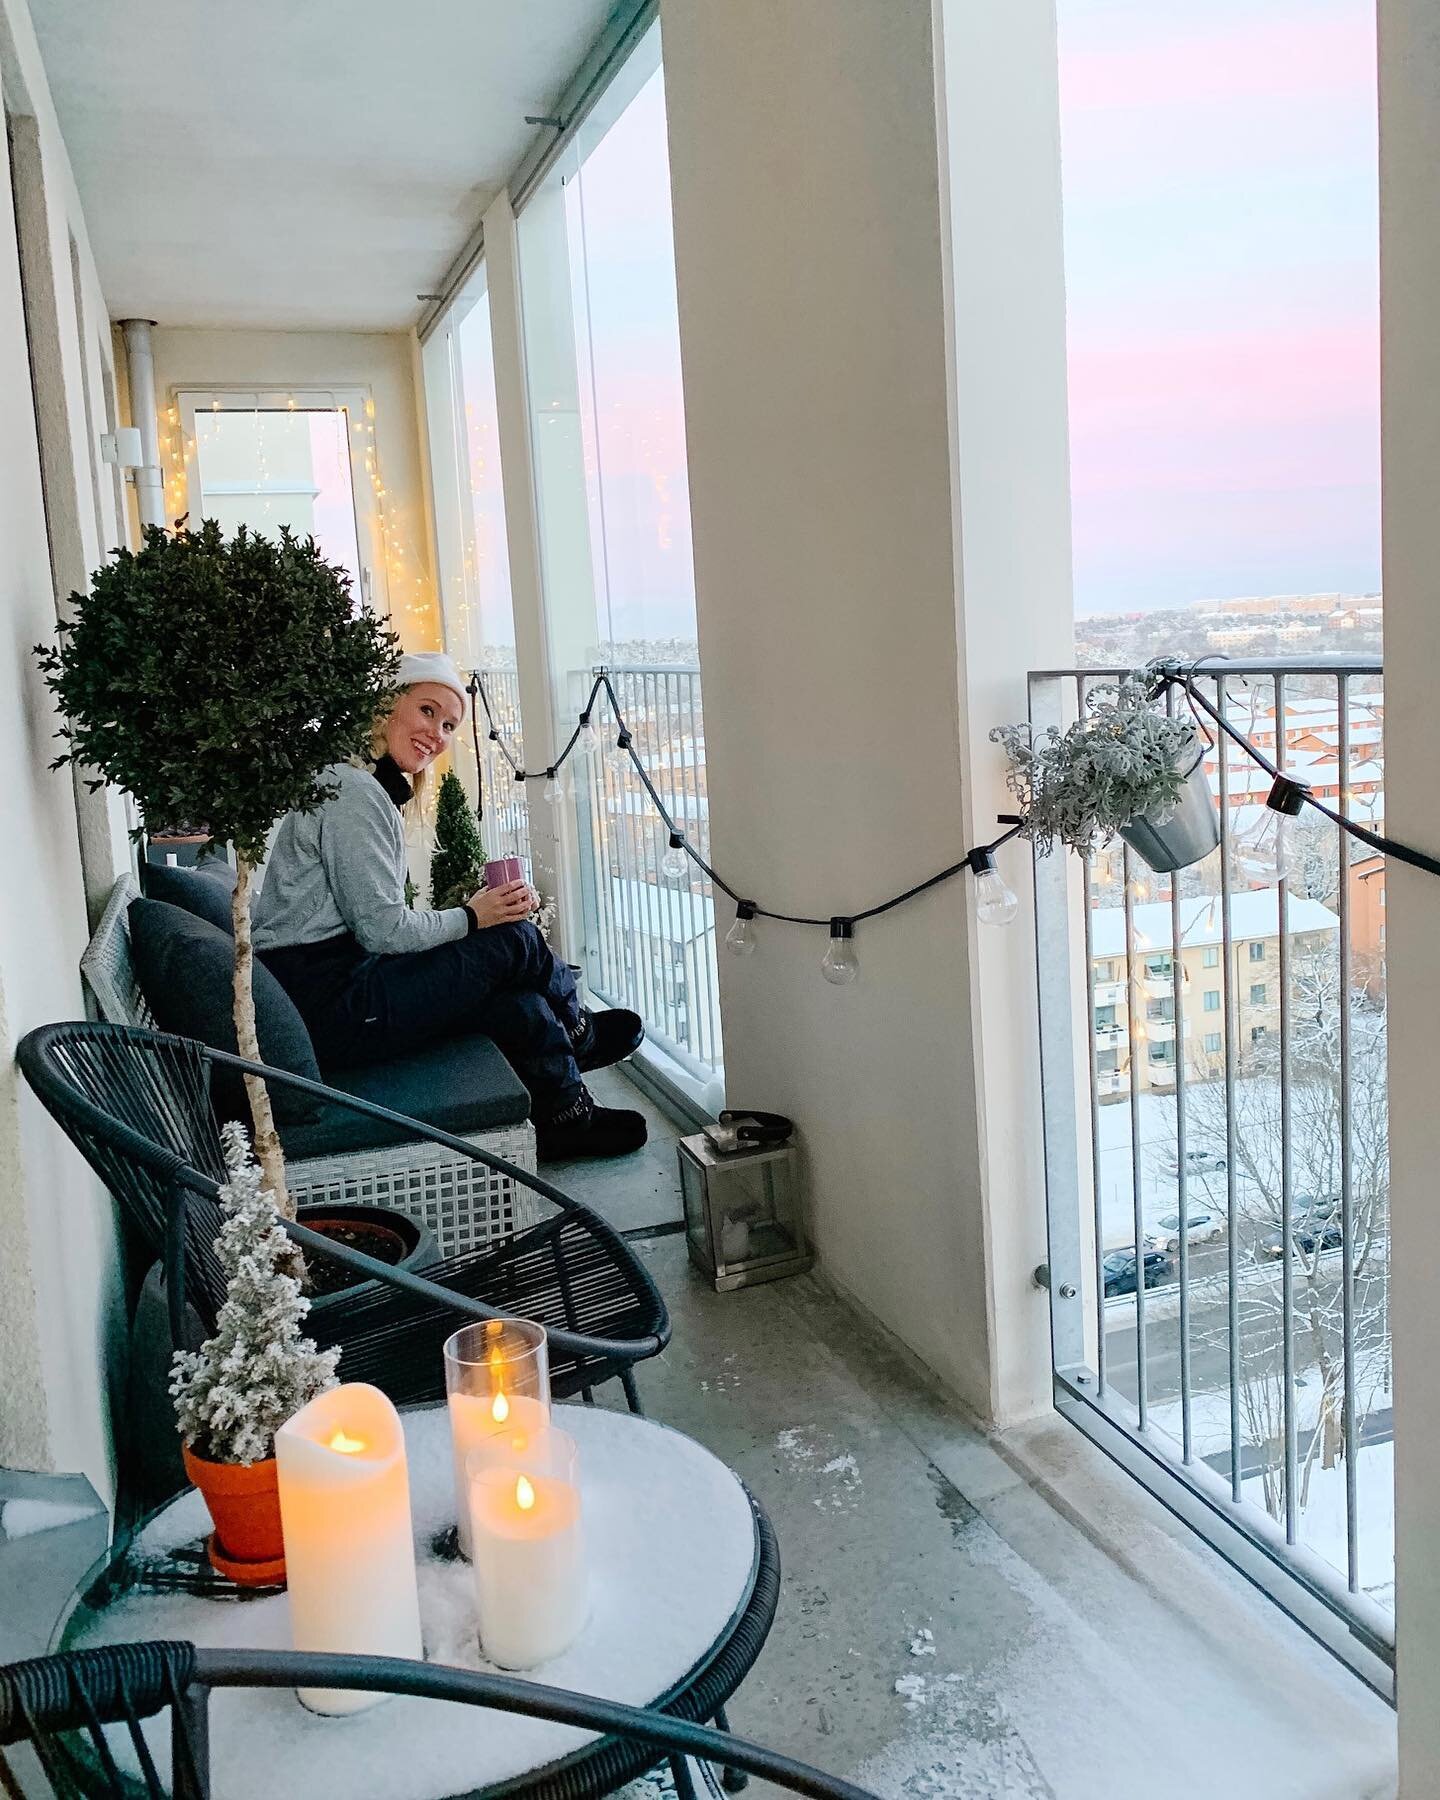 Hot Chocolate on the balcony. So grateful for the gorgeous winter weather. Didn&rsquo;t know how much I needed this! #whitewinter #snowday #sthlm #pinksky #nofilterneeded